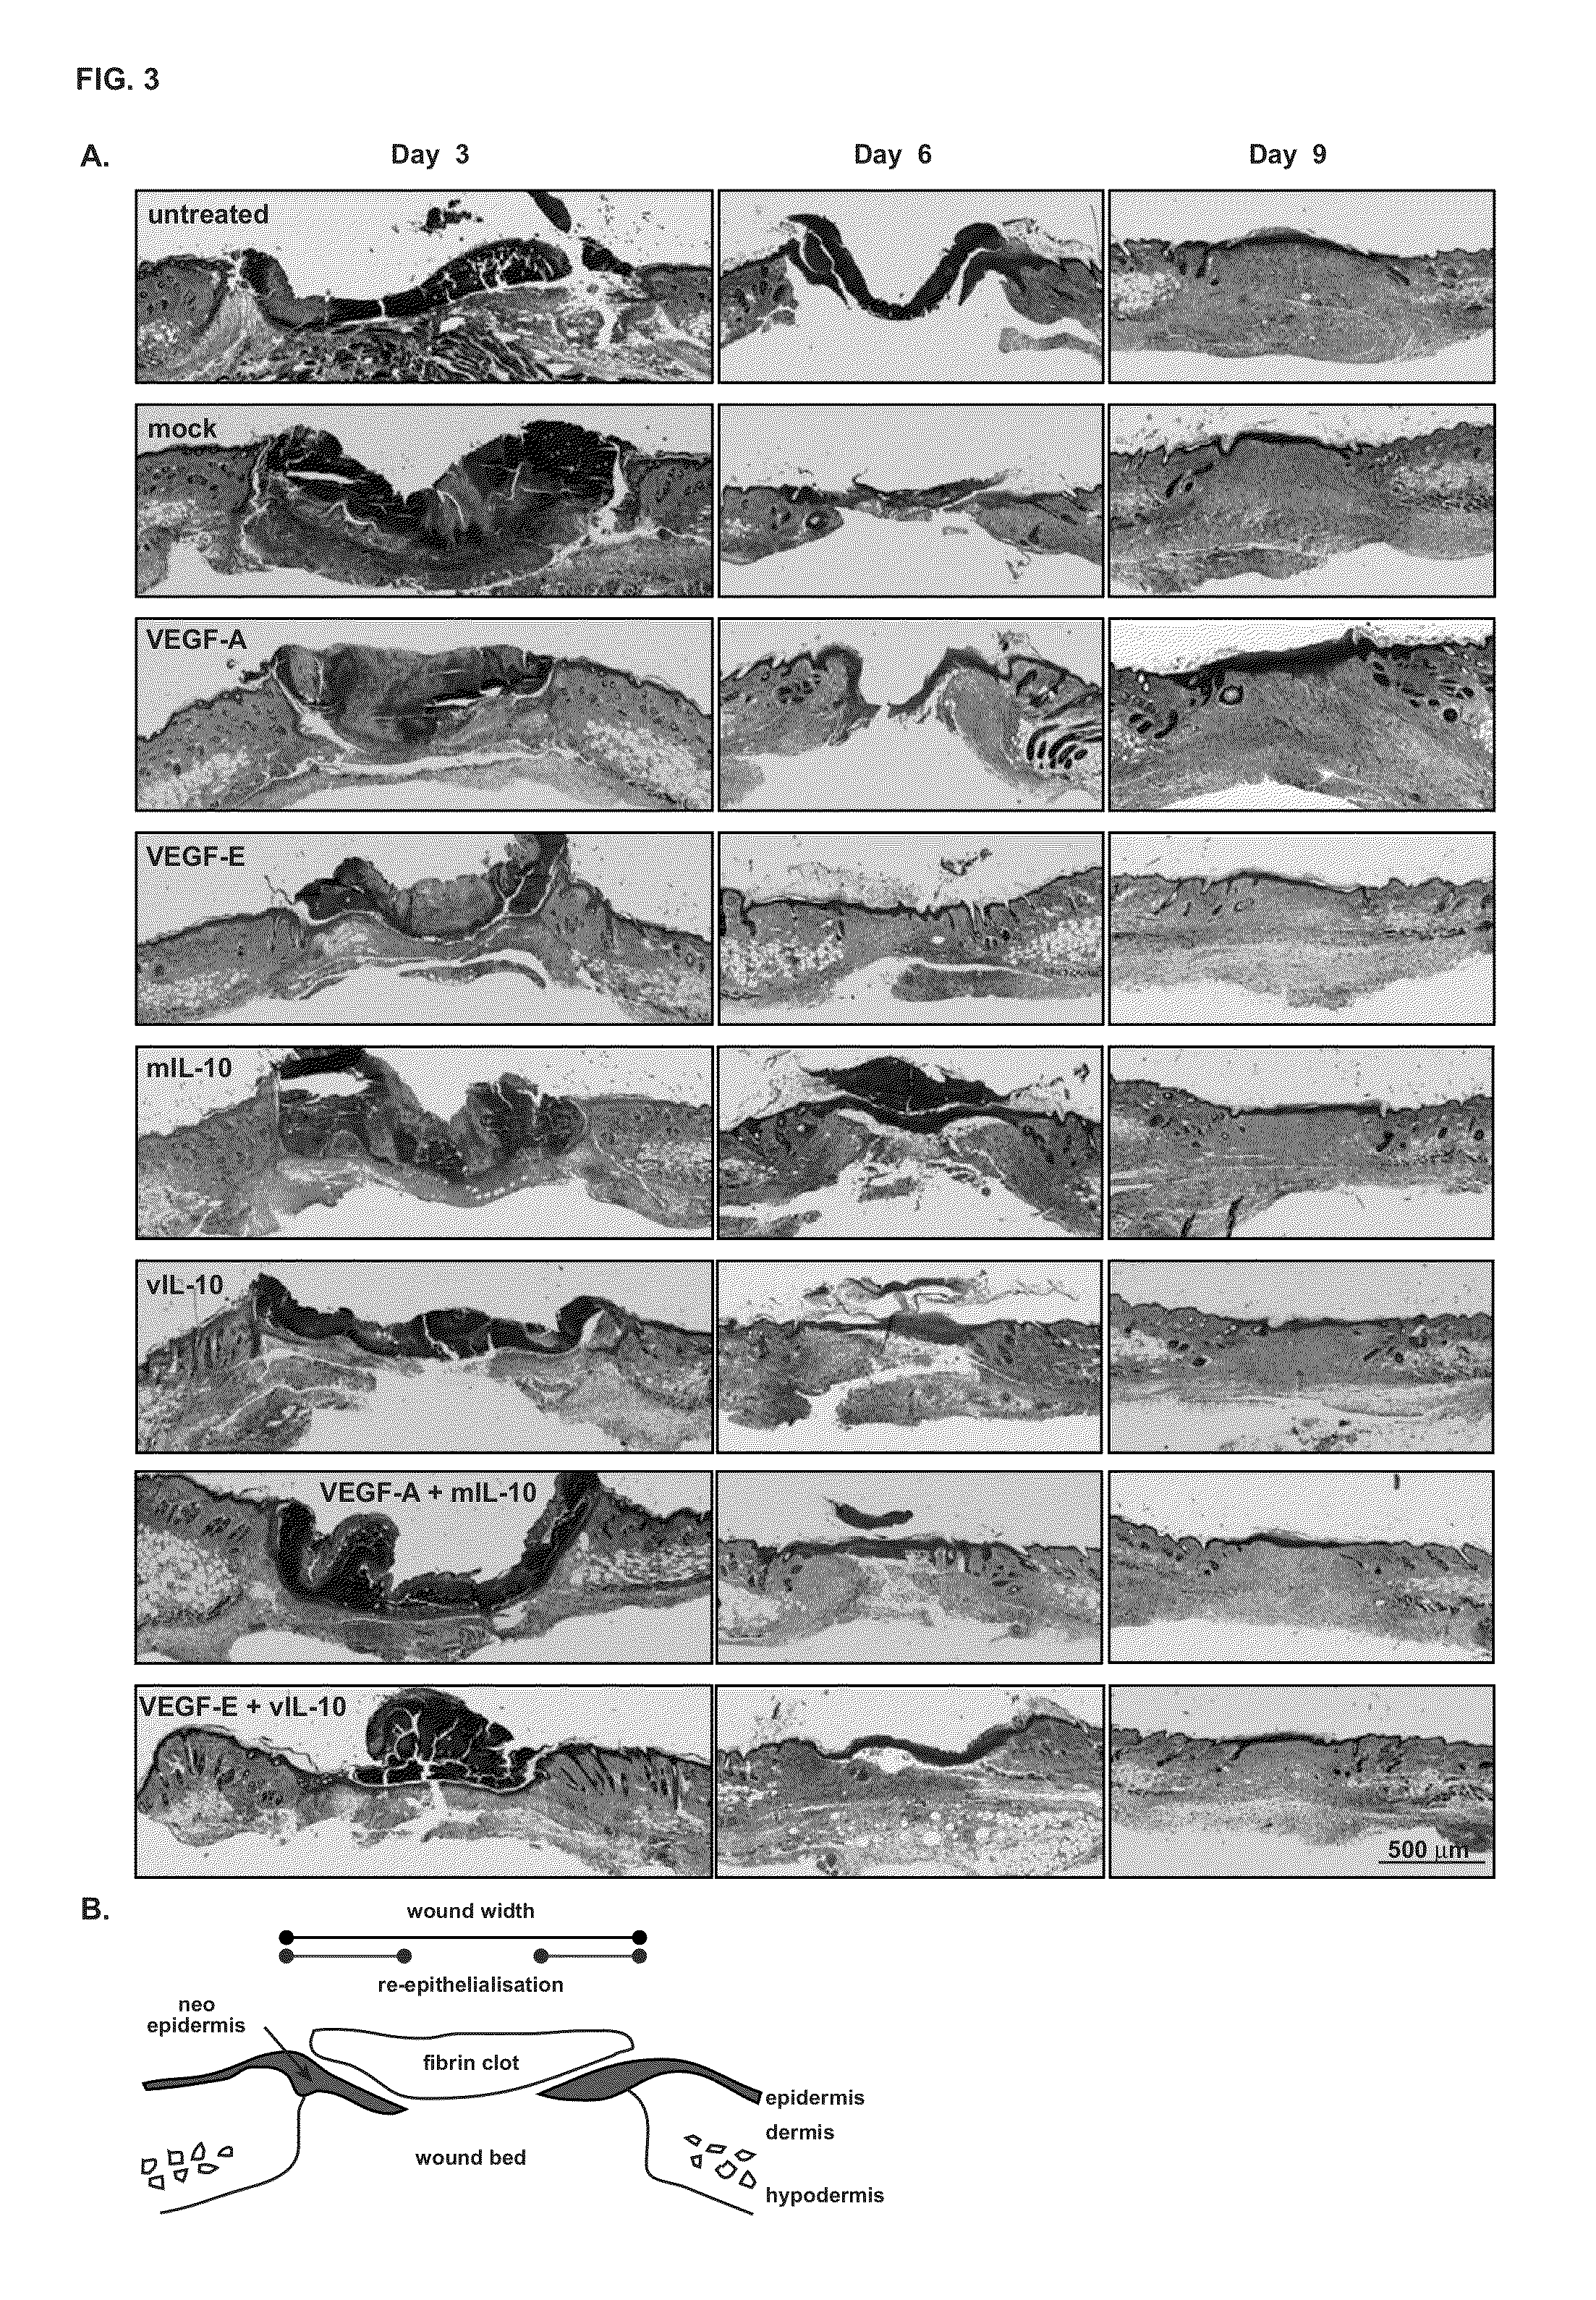 Combination treatments and compositions for wound healing comprising viral VEGF